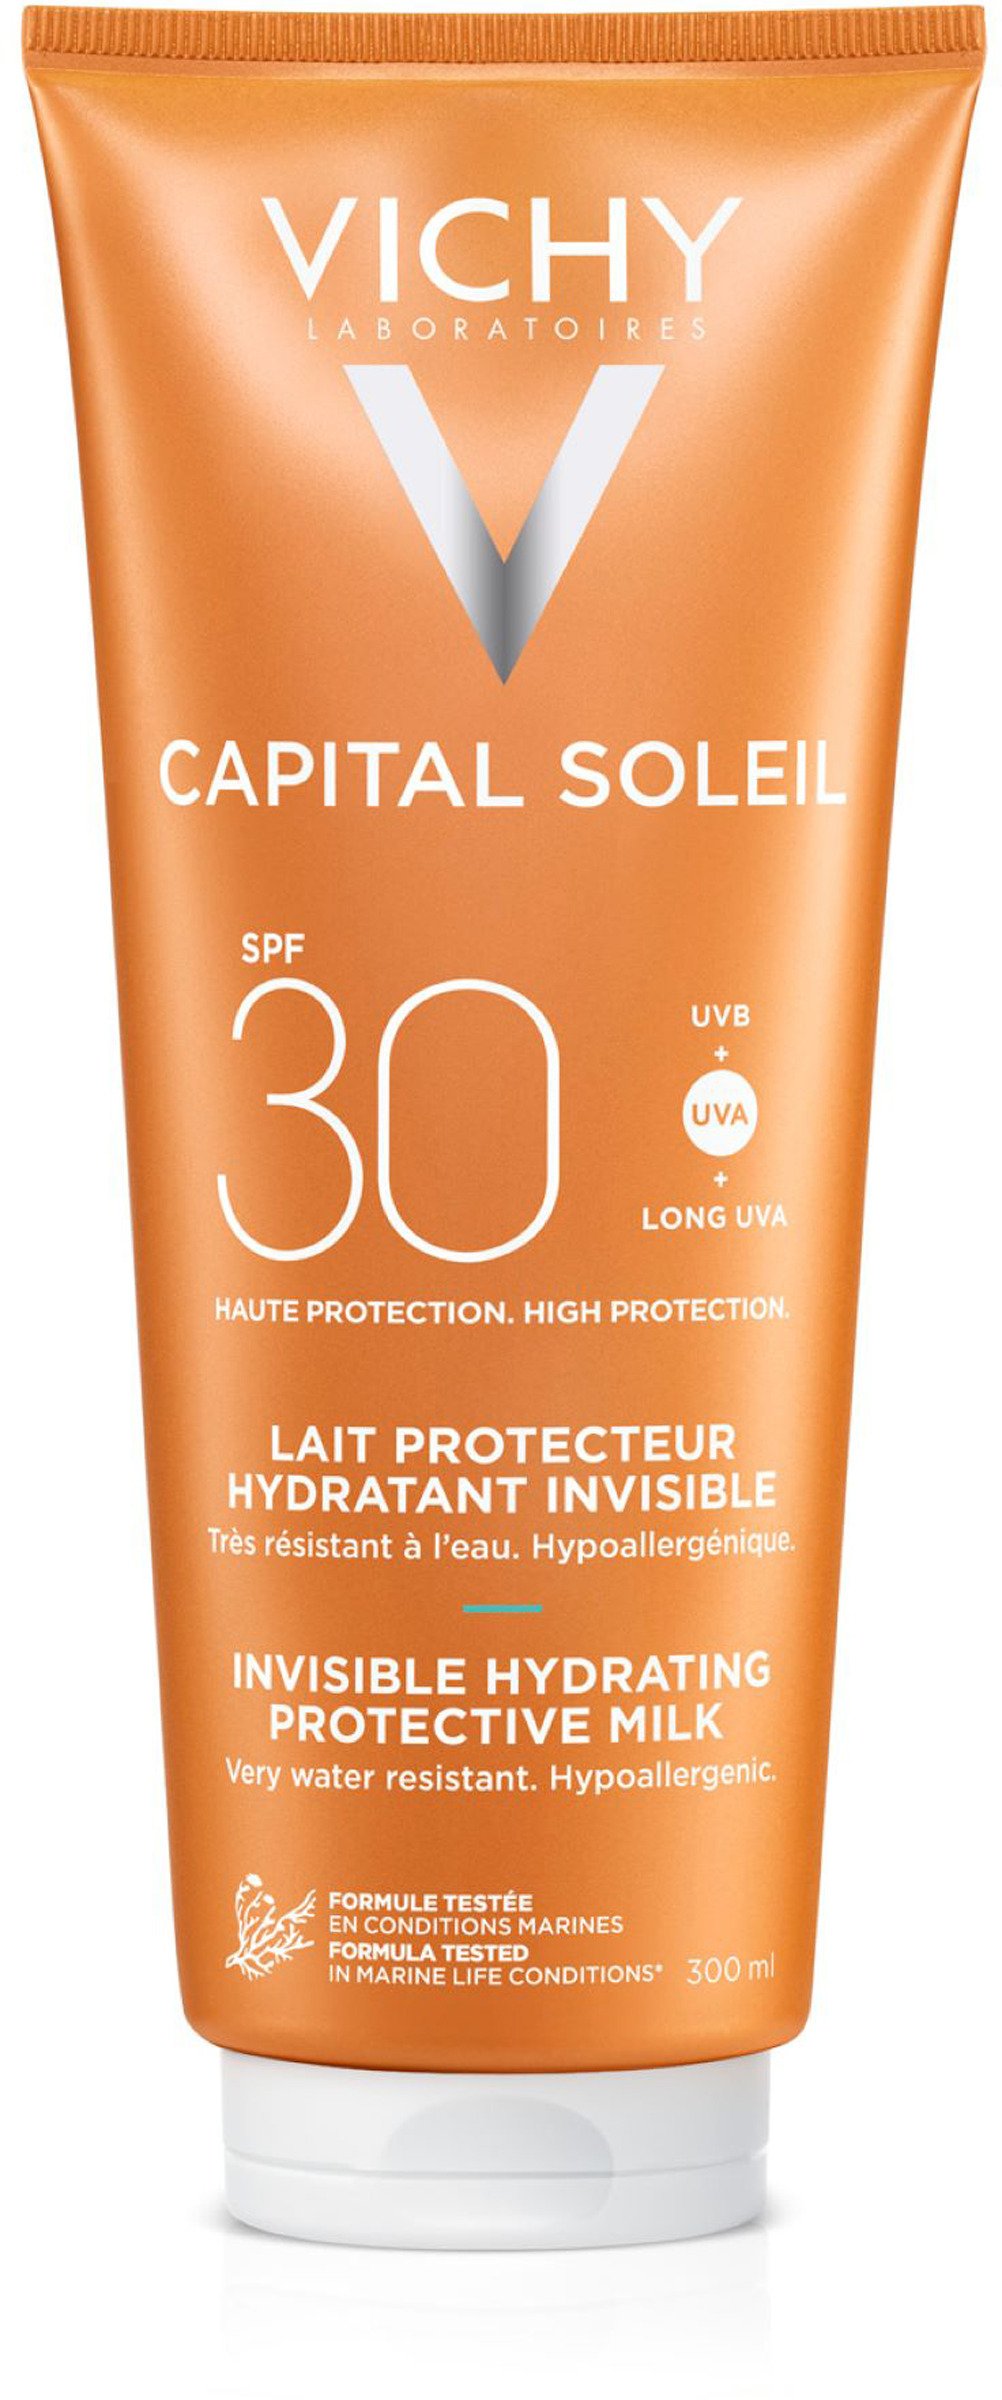 Vichy Capital Soleil Invisible Hydrating SPF30 Protective Milk 300 ml